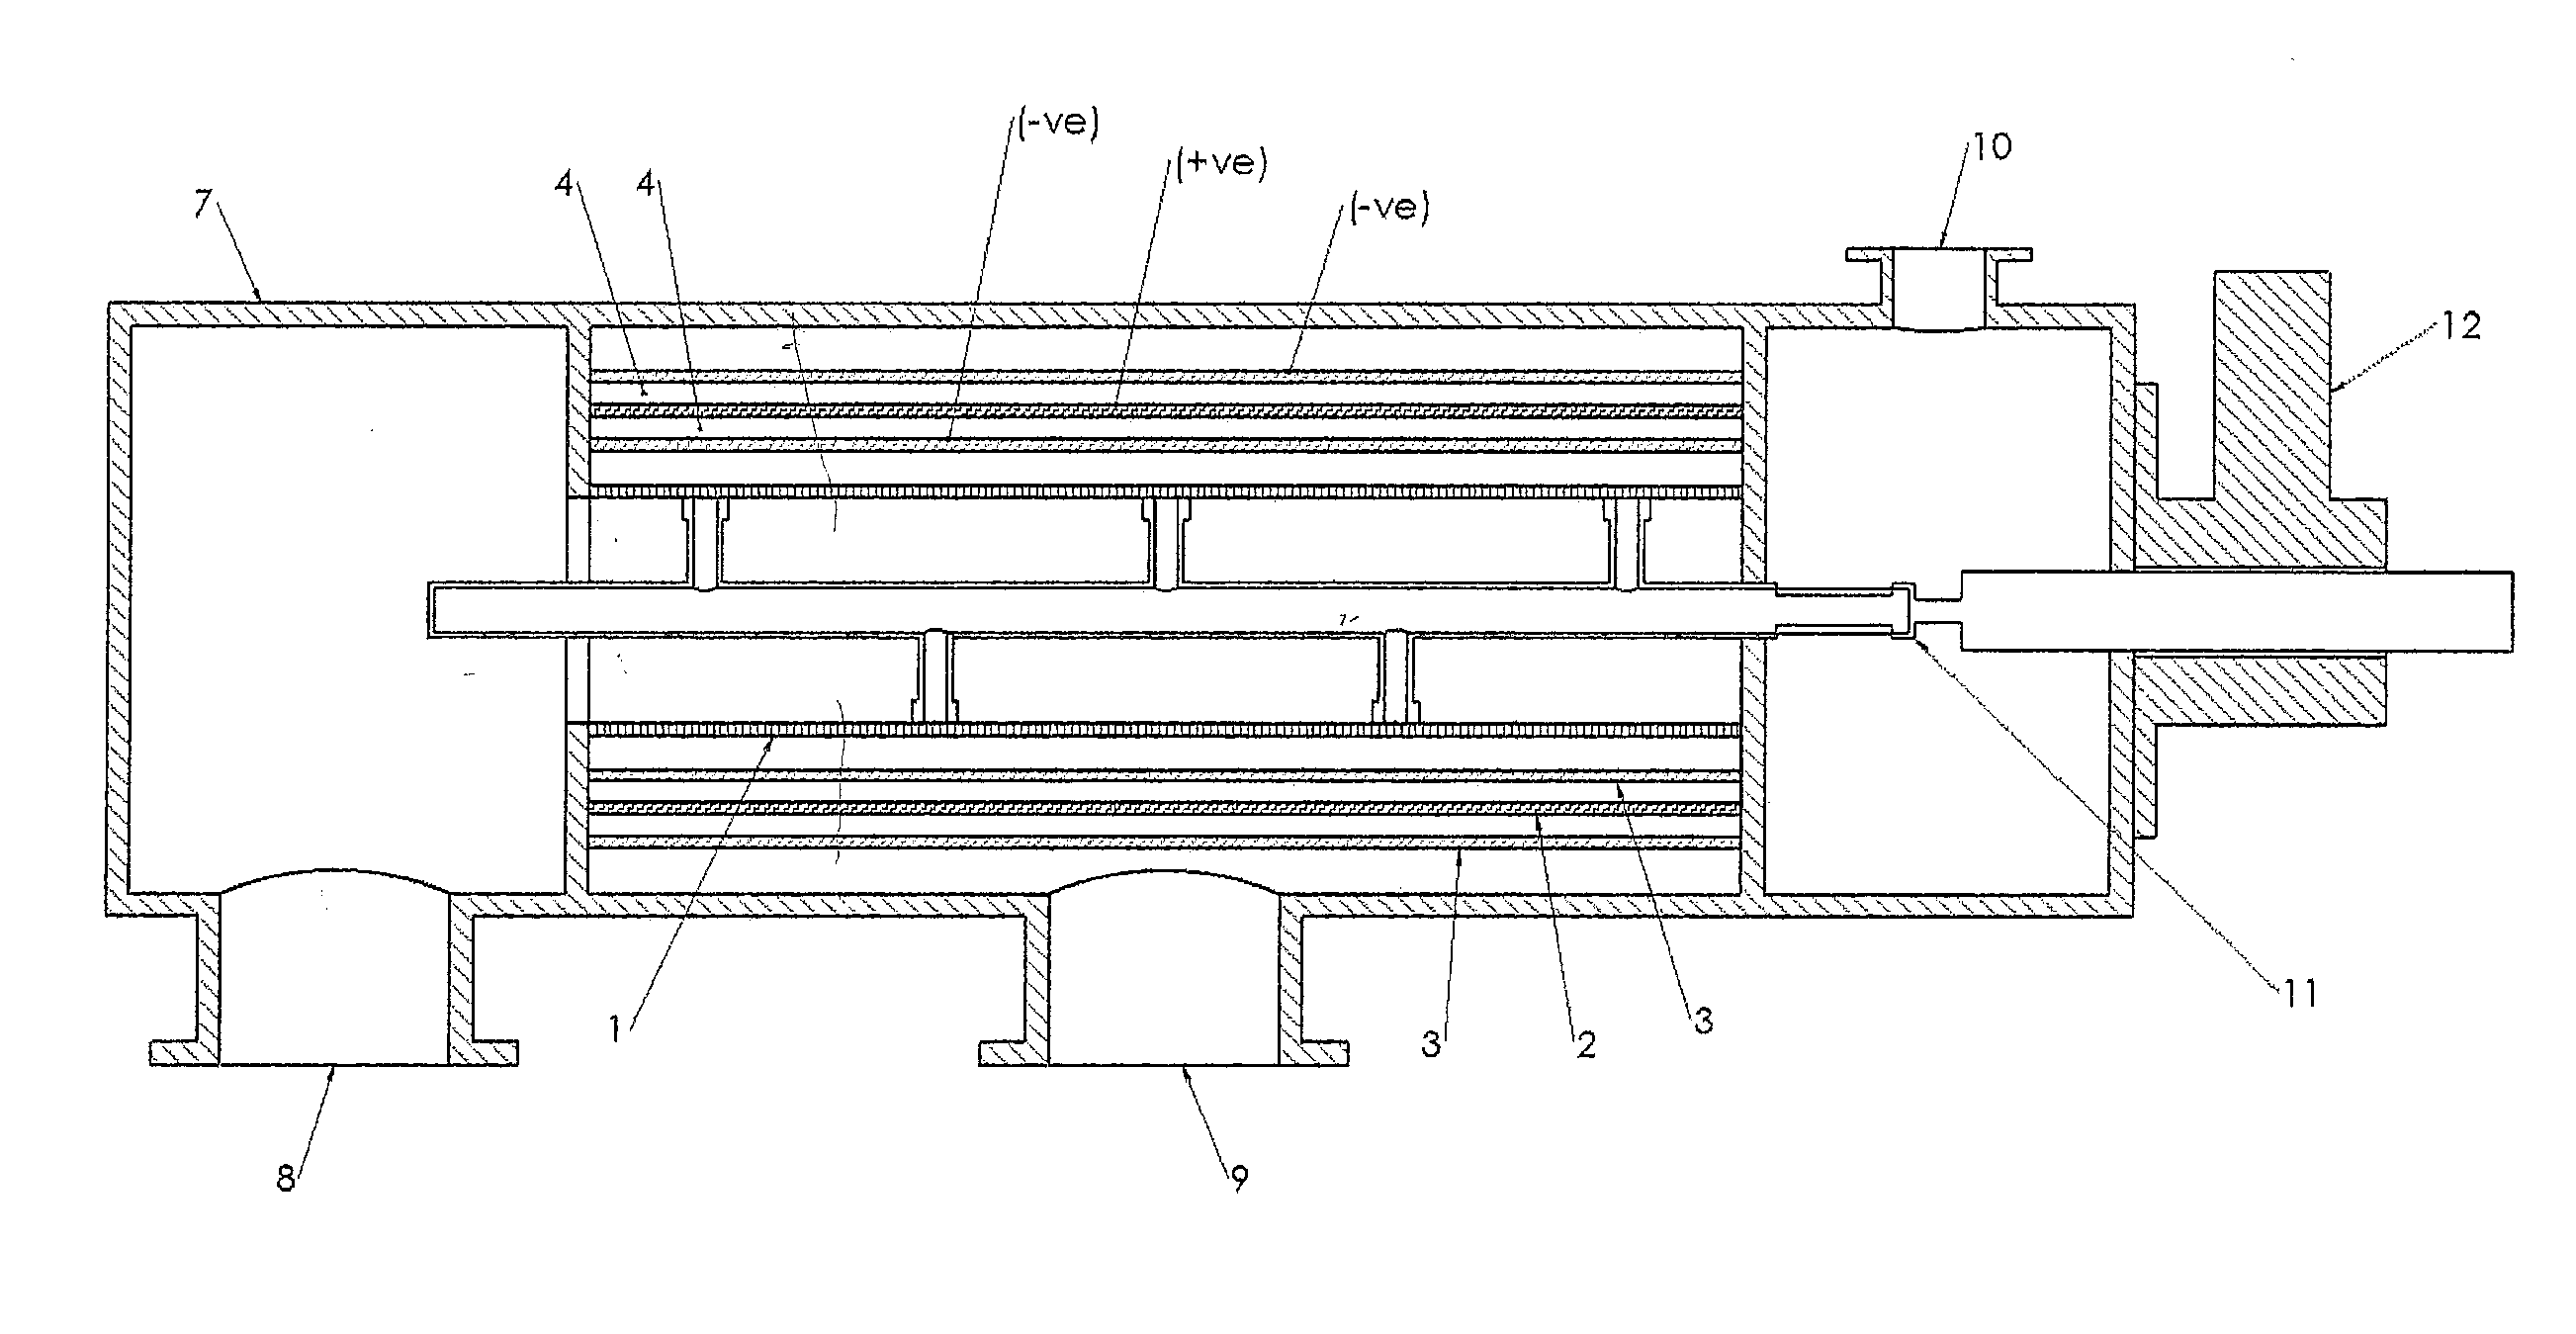 Electro-chemical filter apparatus